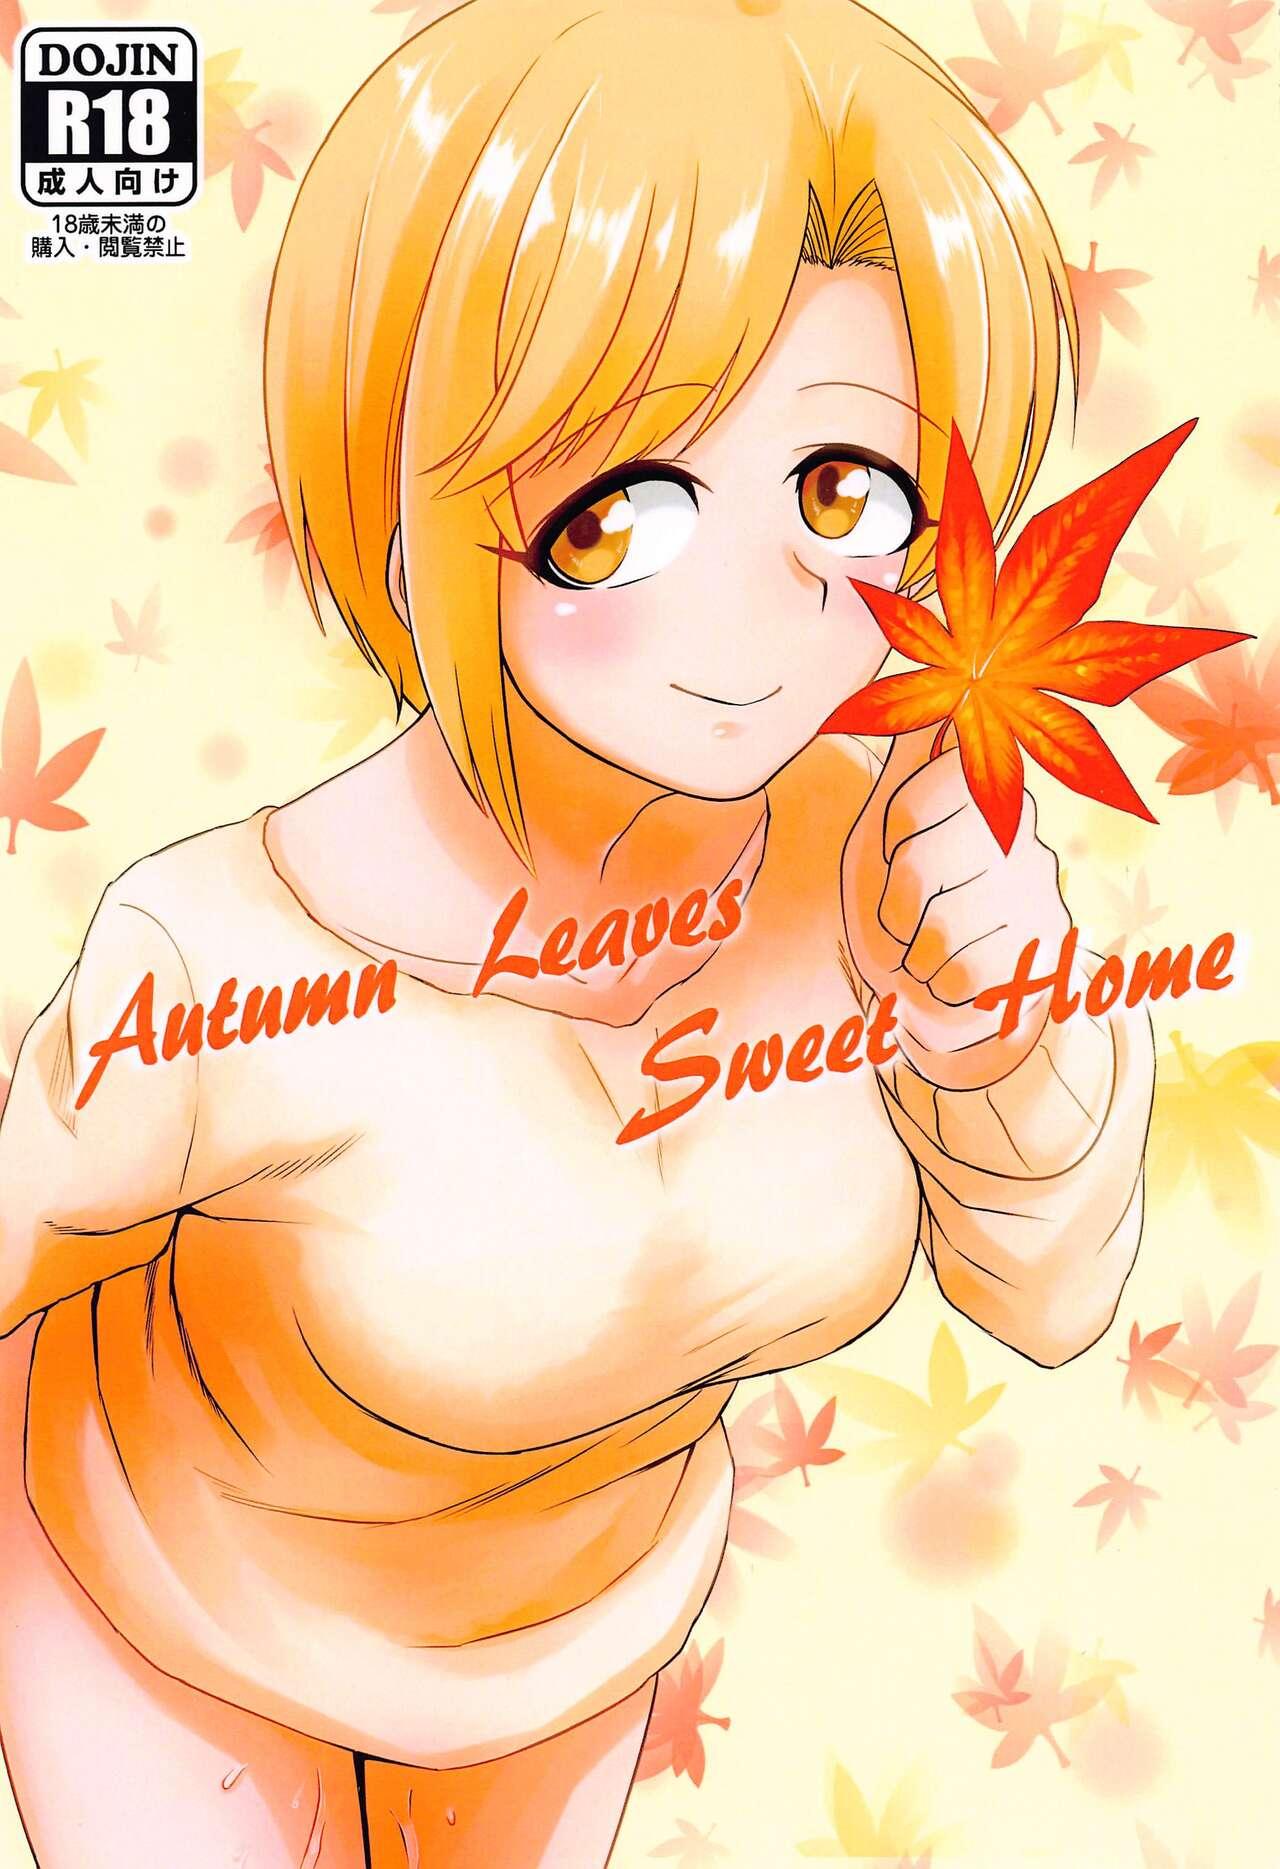 Mofos Autumn Leaves Sweet Home - The idolmaster Collar - Page 1